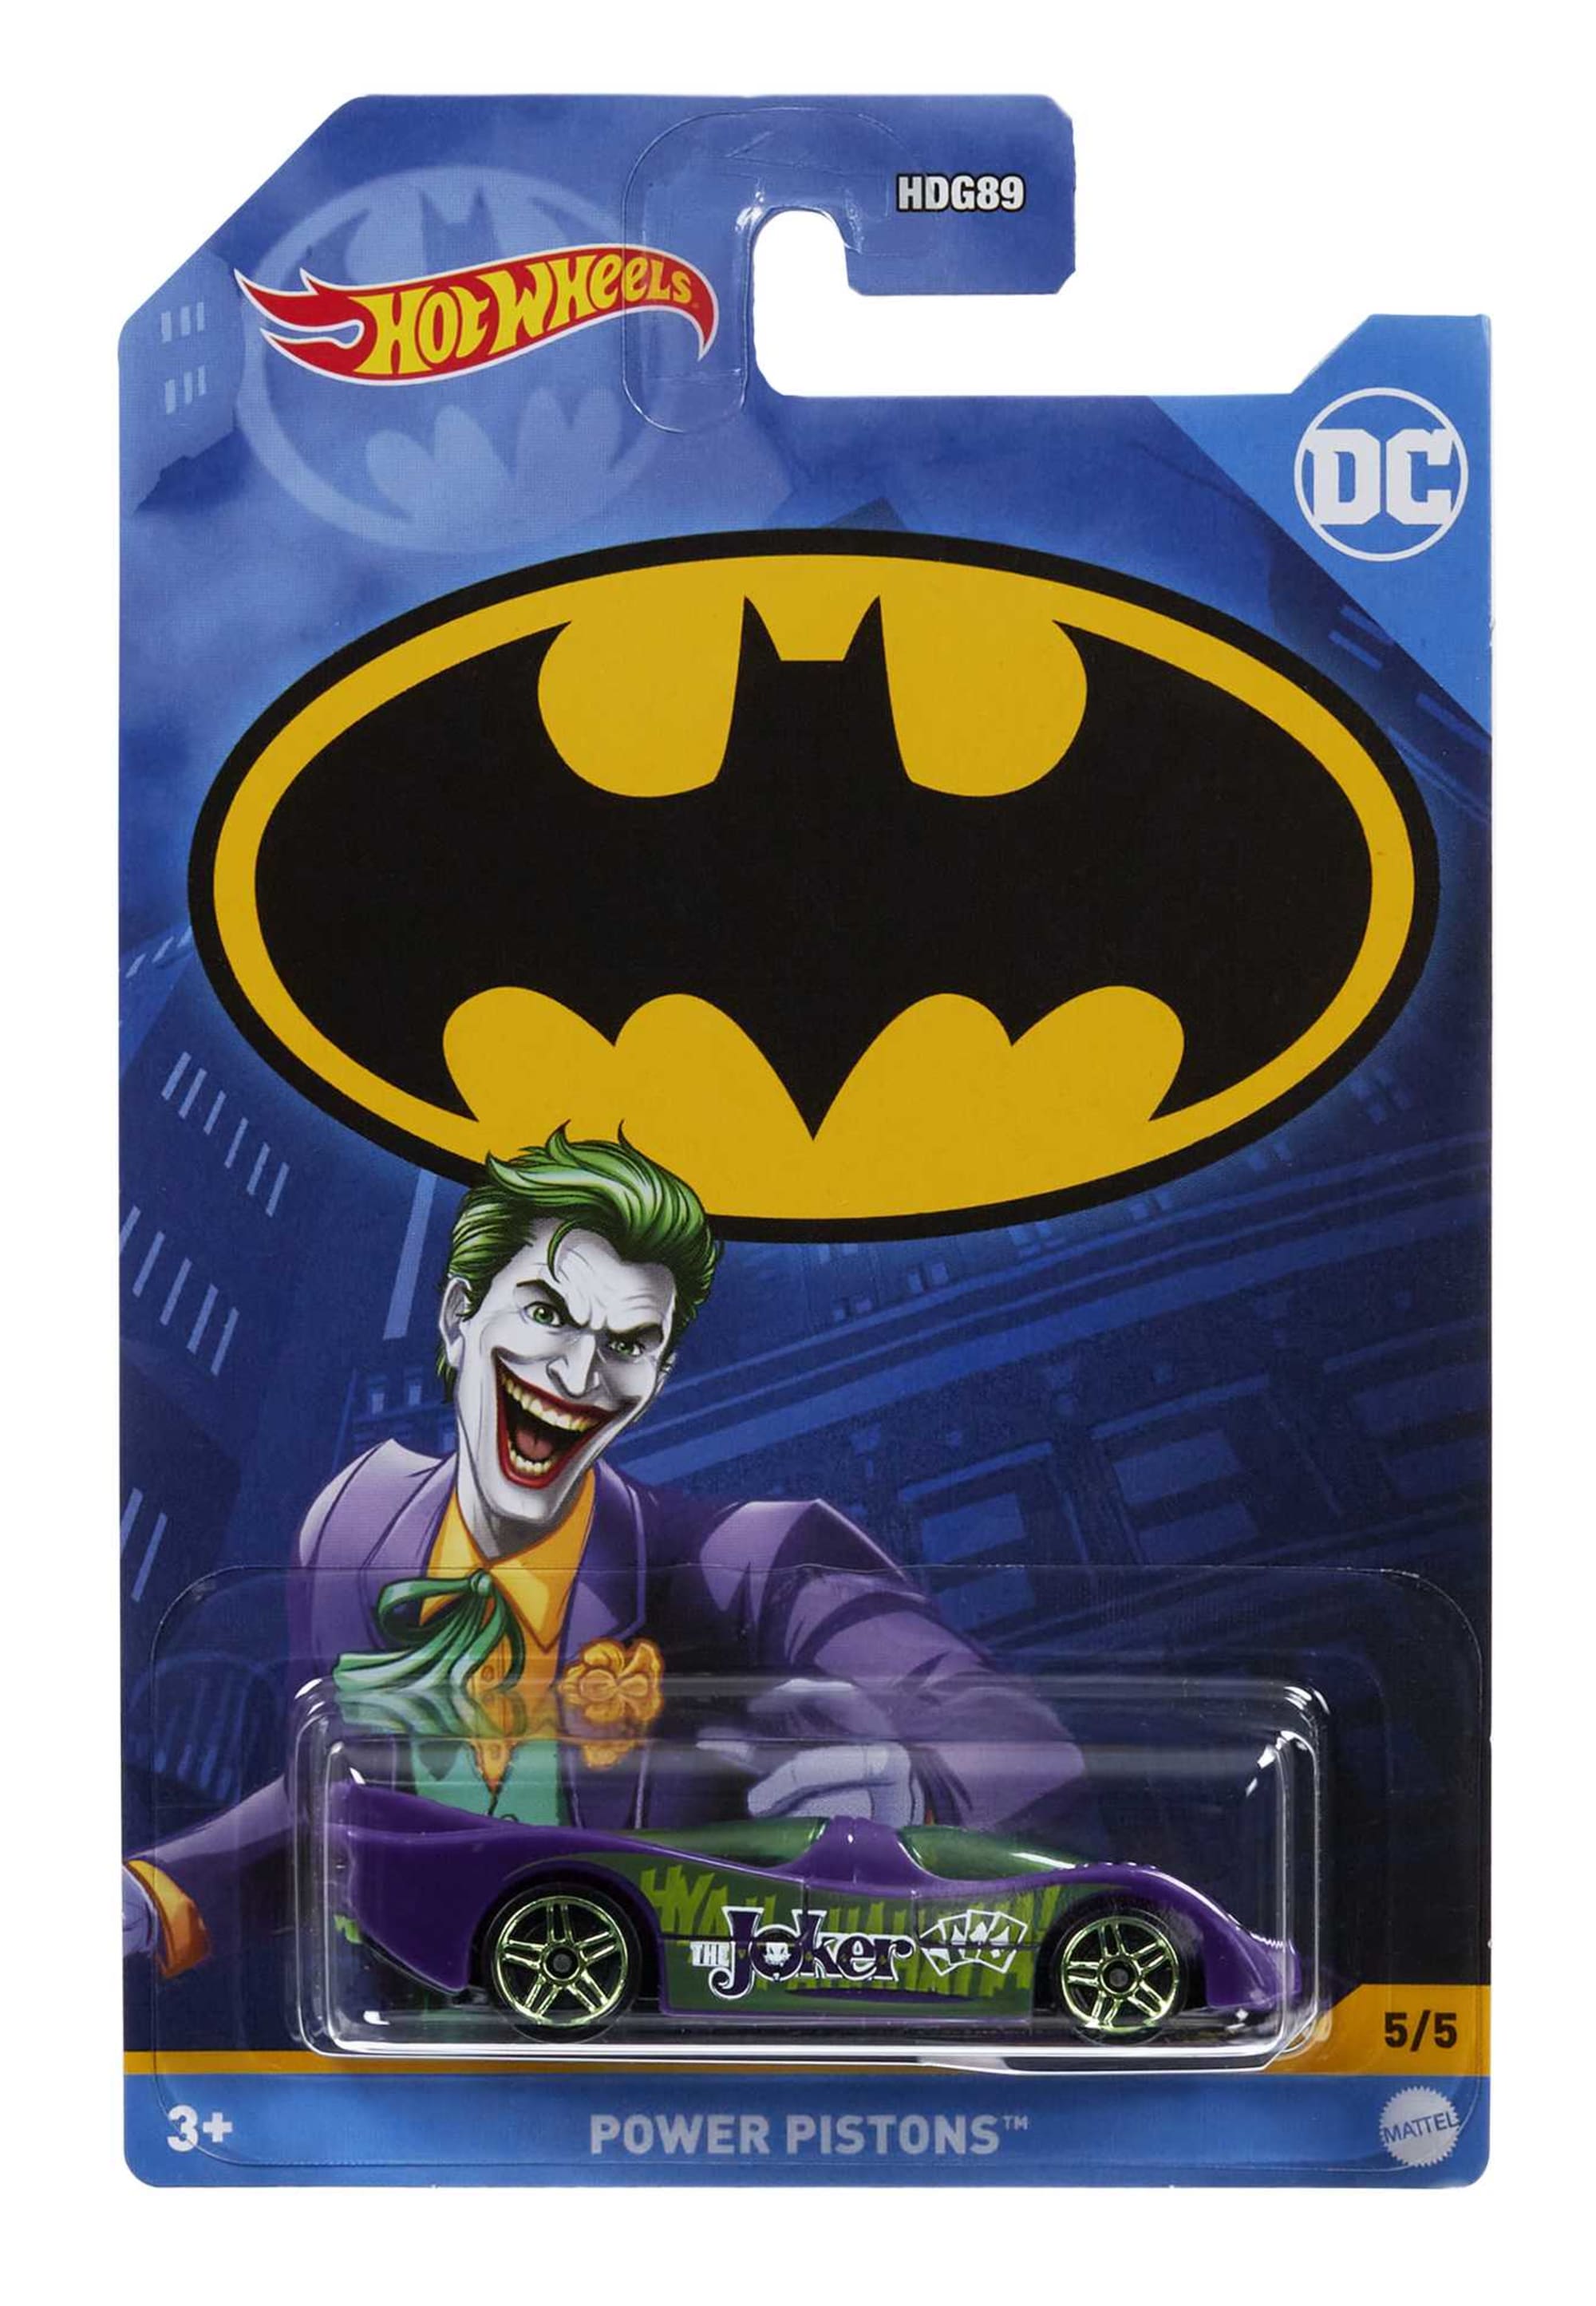 Hot Wheels Batman-Themed 1:64 Scale Vehicle, Popular Hero & Villain Casting  from the Global Franchise, Die-Cast, Toy for Collectors & Kids 3 Years Old  & Up | HDG89 | MATTEL